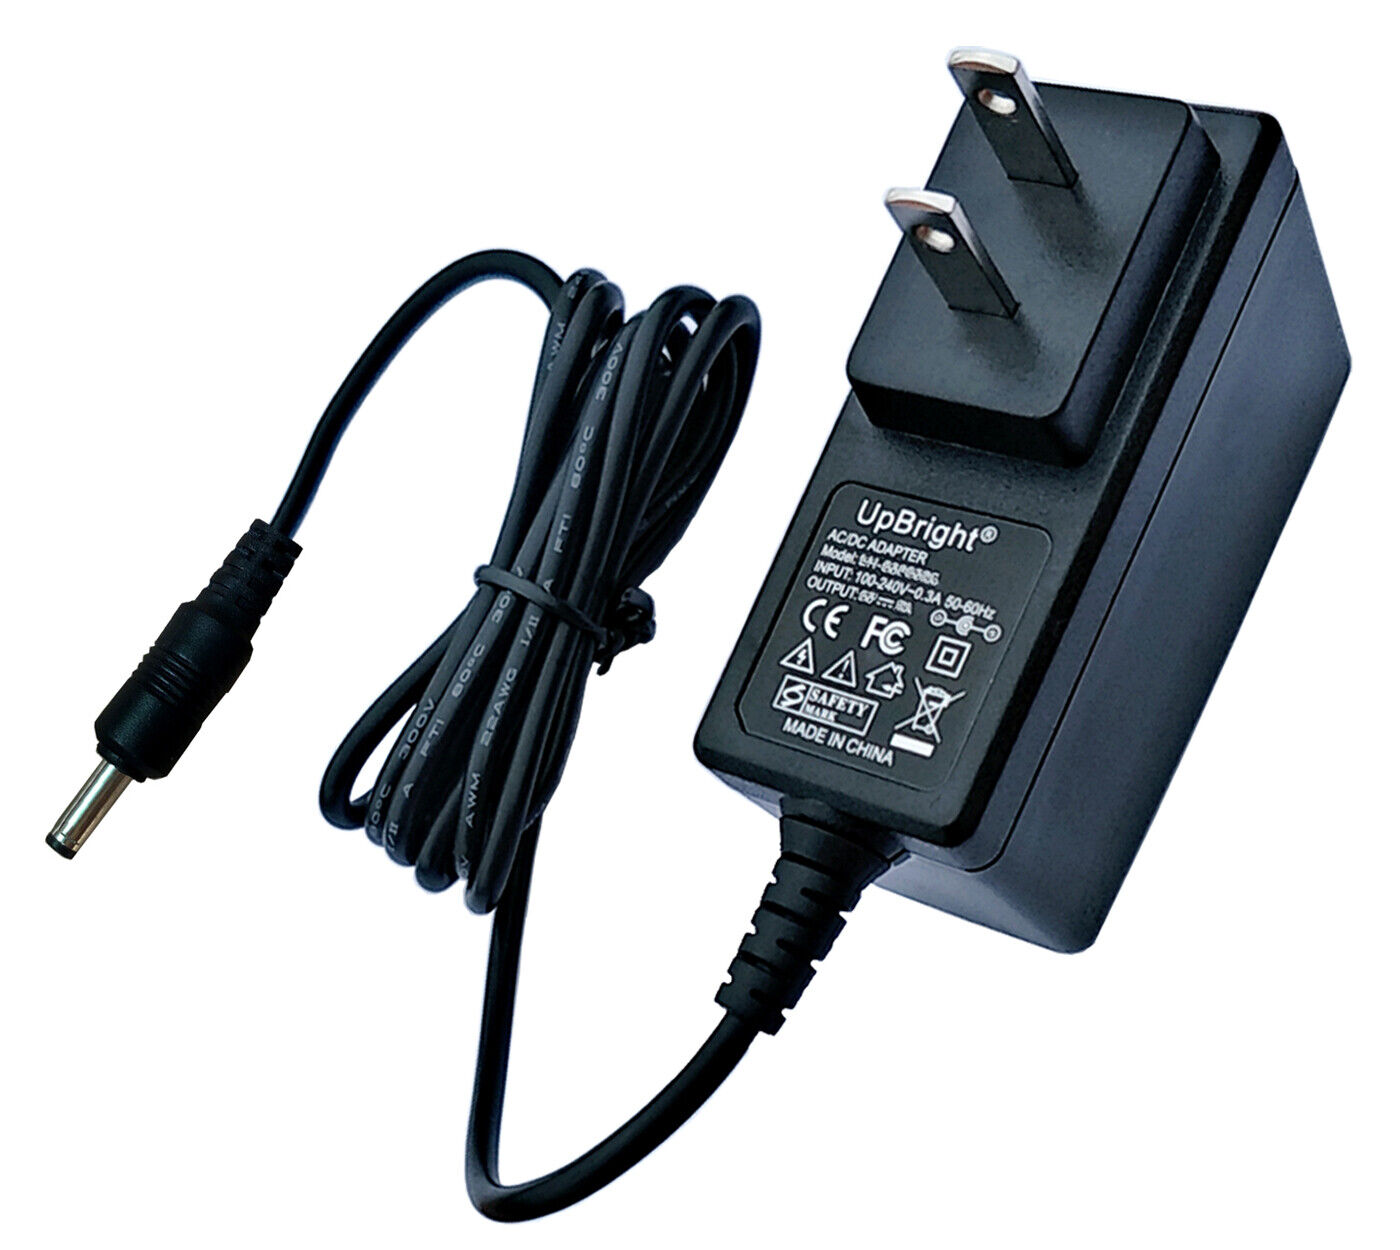 AC Adapter For Minelab 119 0302-0001 FBS E-Trac Metal Detectors Battery Charger